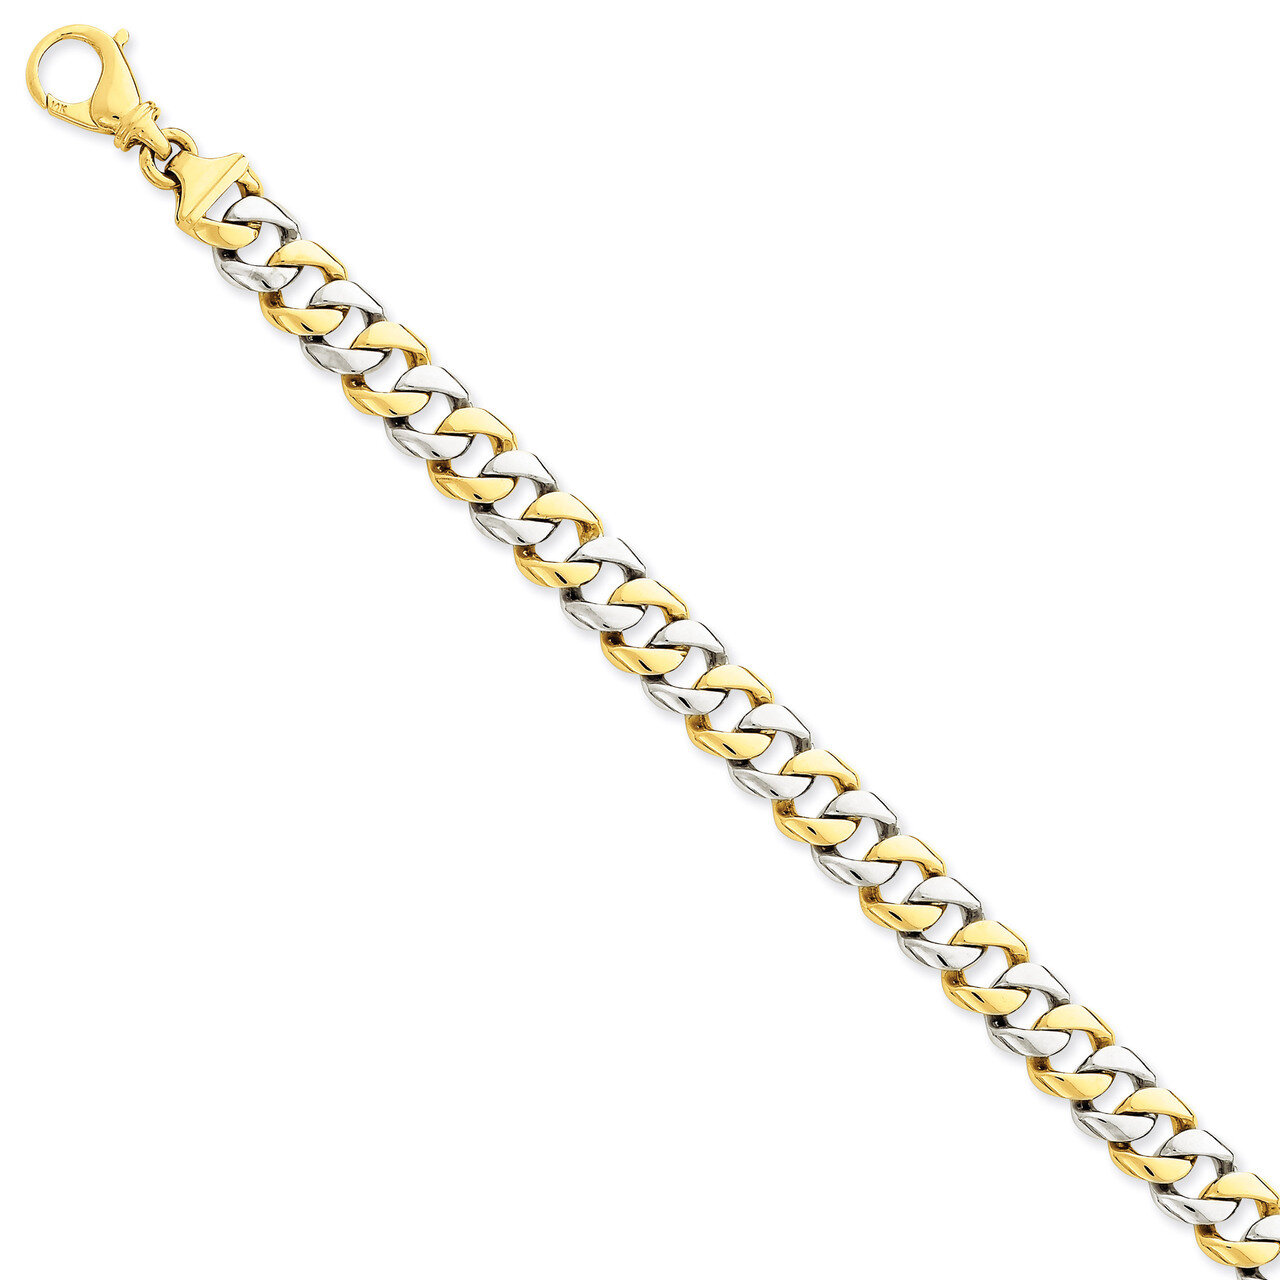 9.6mm Polished Fancy Link Chain 24 Inch 14k Two-Tone Gold LK512-24